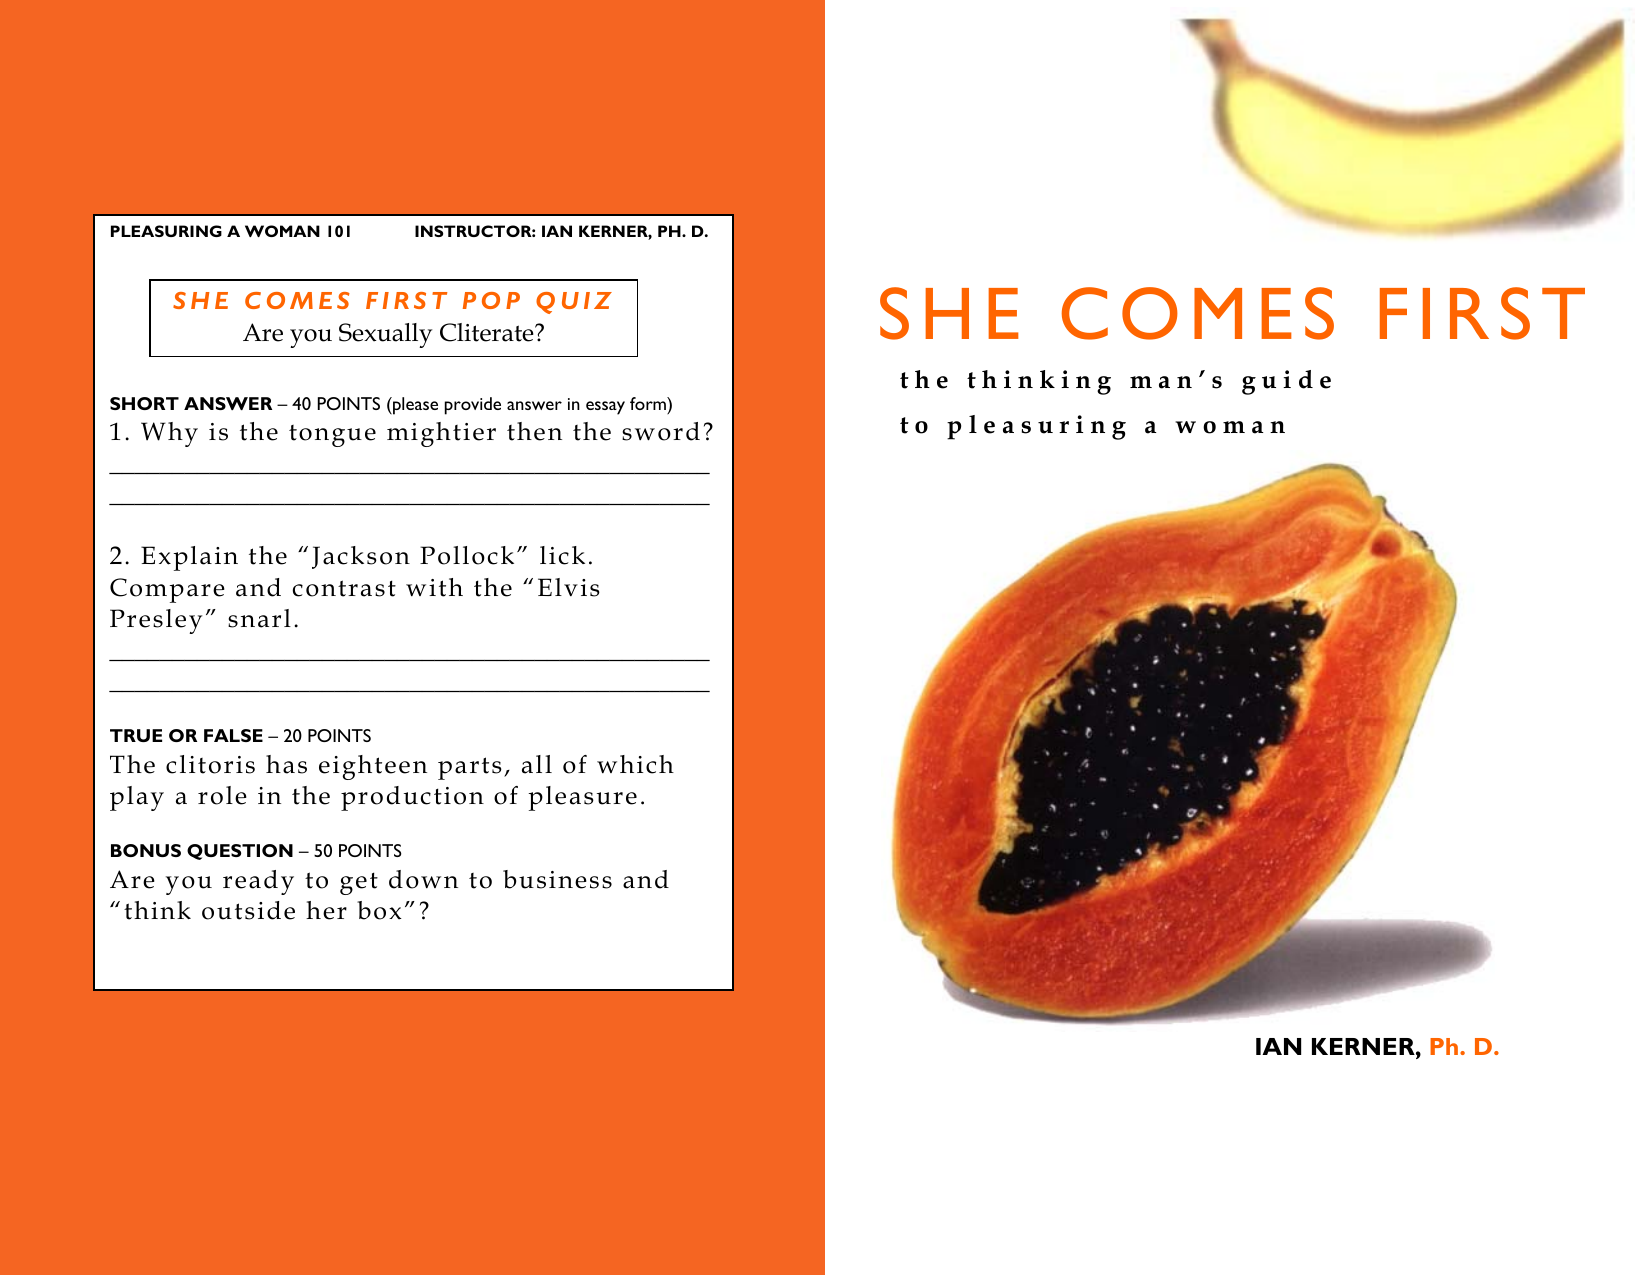 She comes first book summary